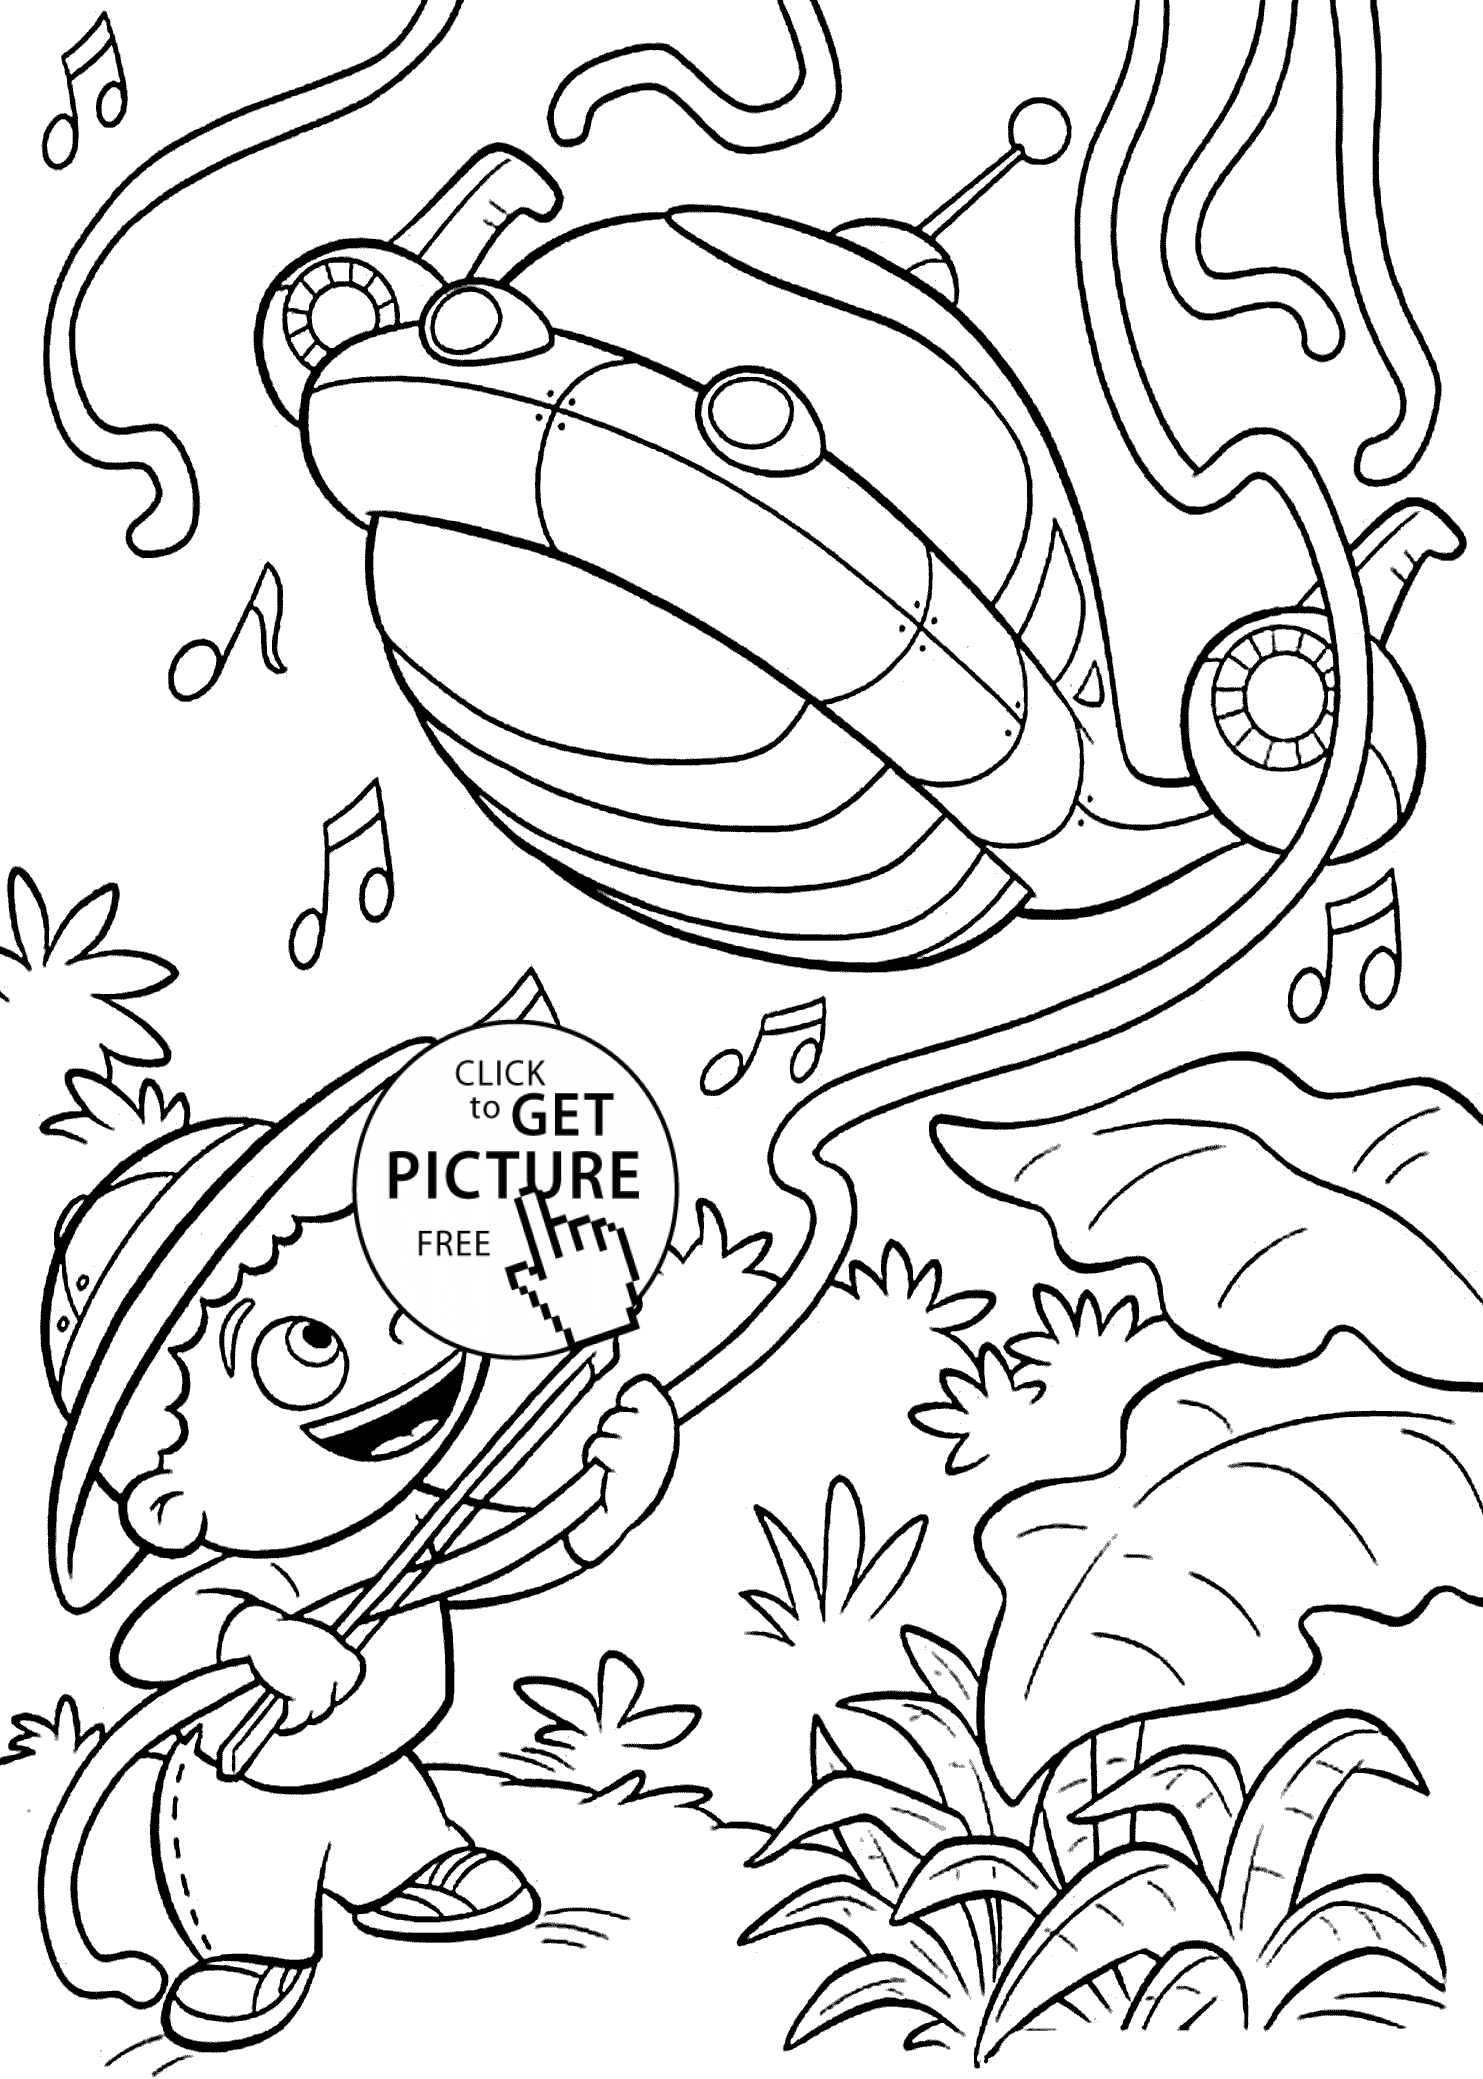 free-little-einsteins-coloring-pages-free-download-free-little